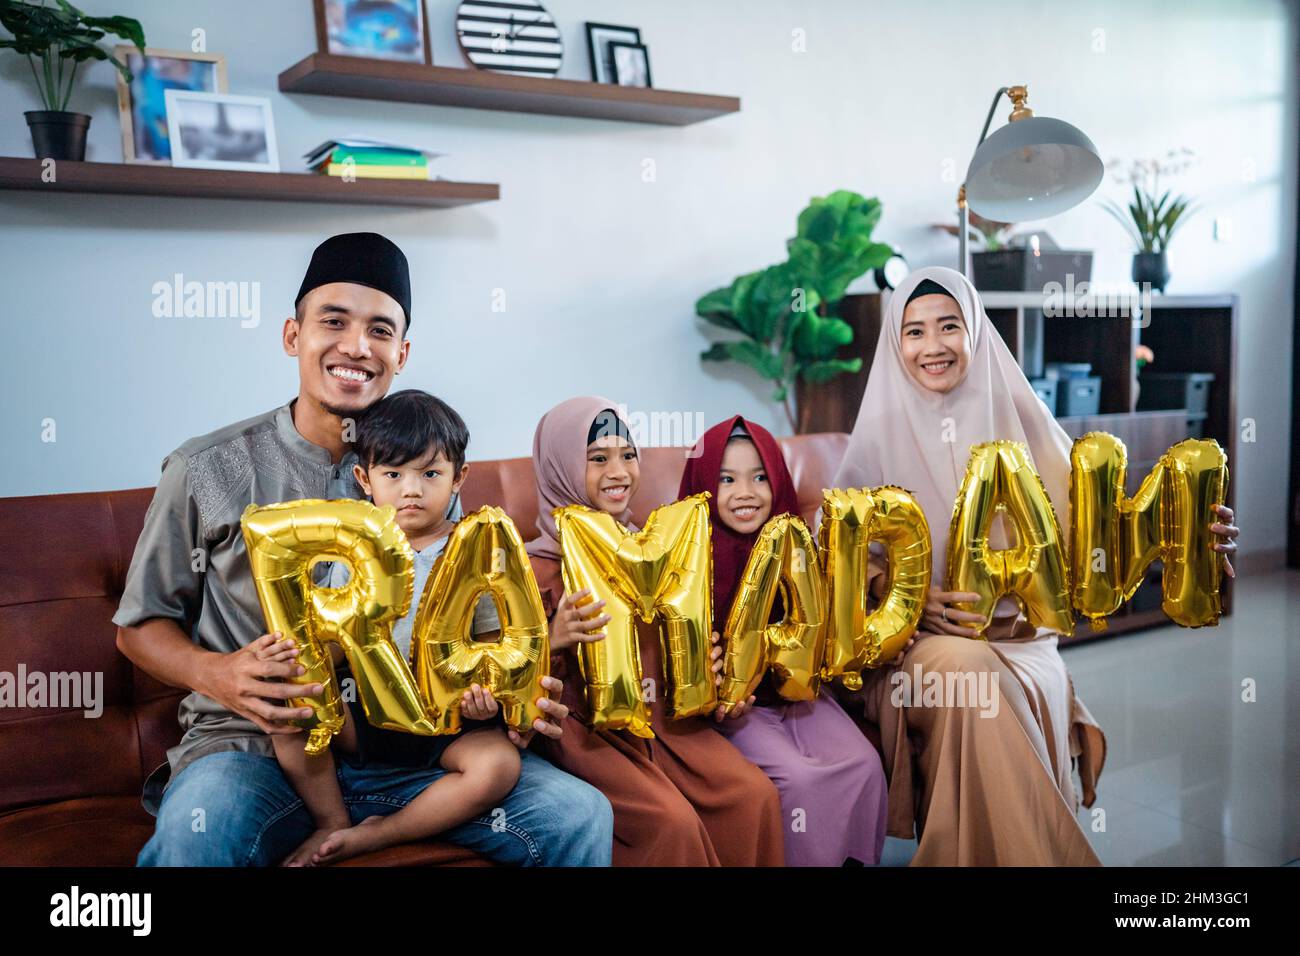 family wearing muslim traditional clothes holding a text of ramadan Stock Photo